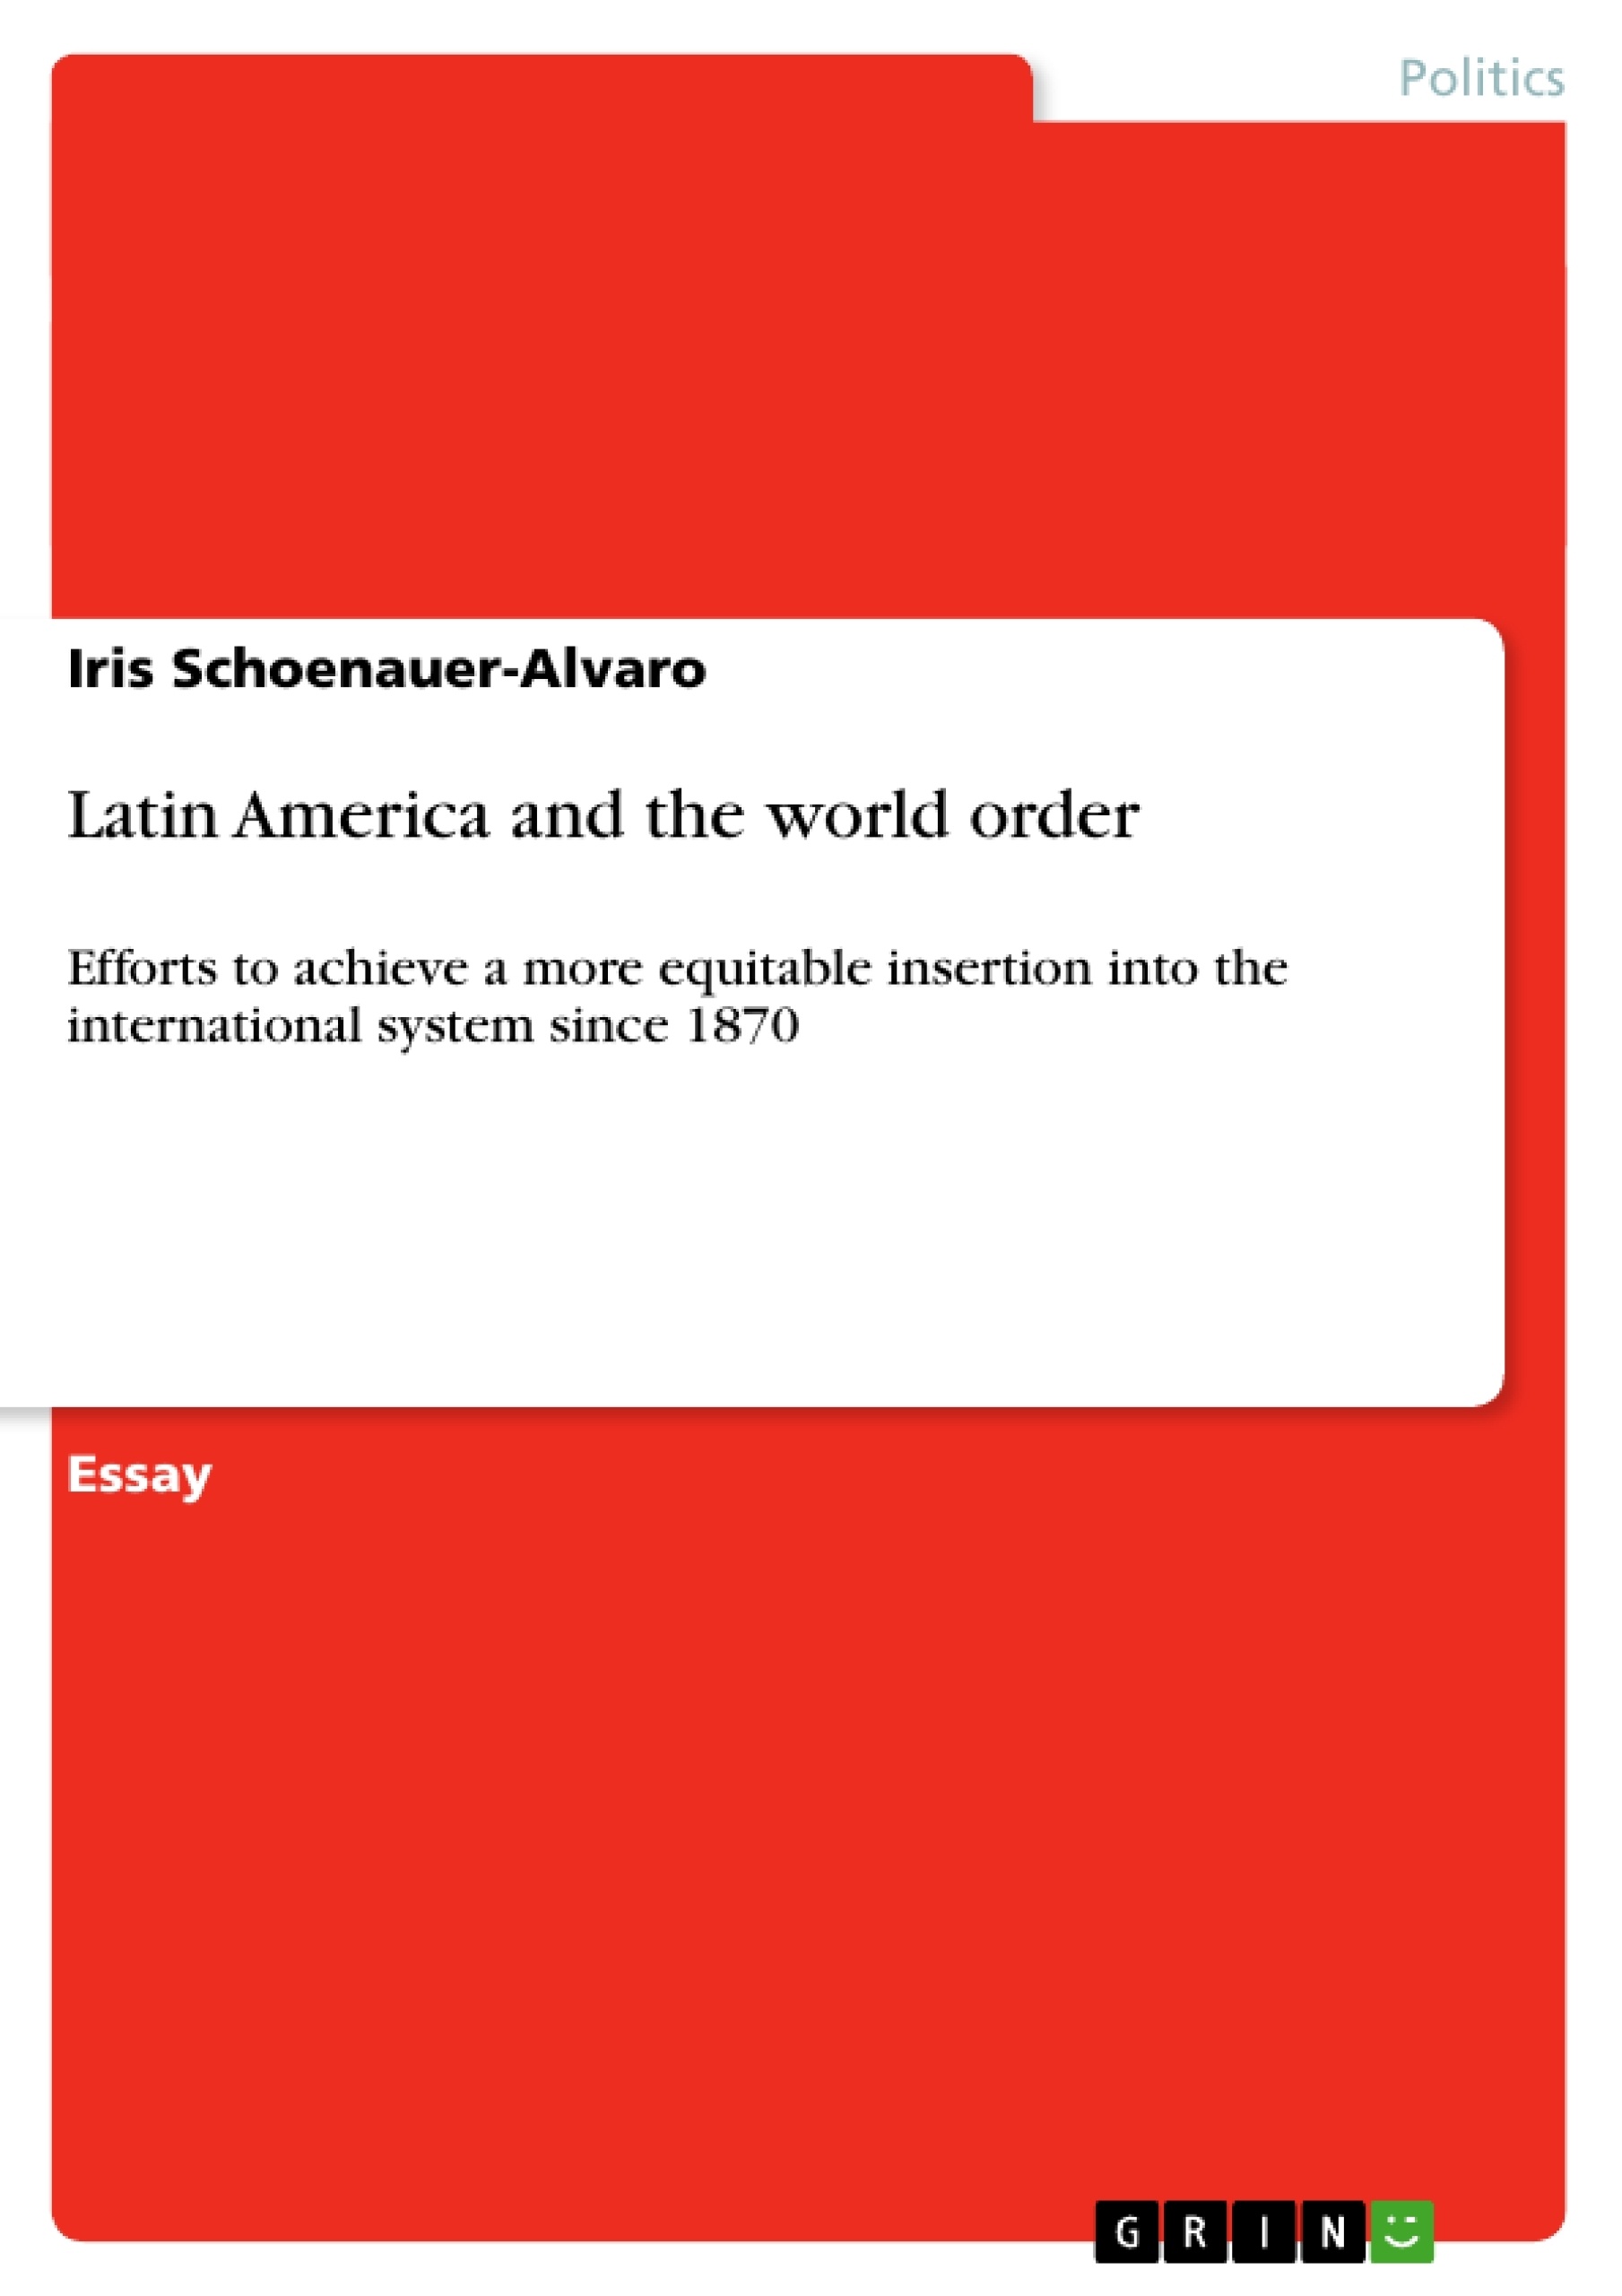 Título: Latin America and the world order